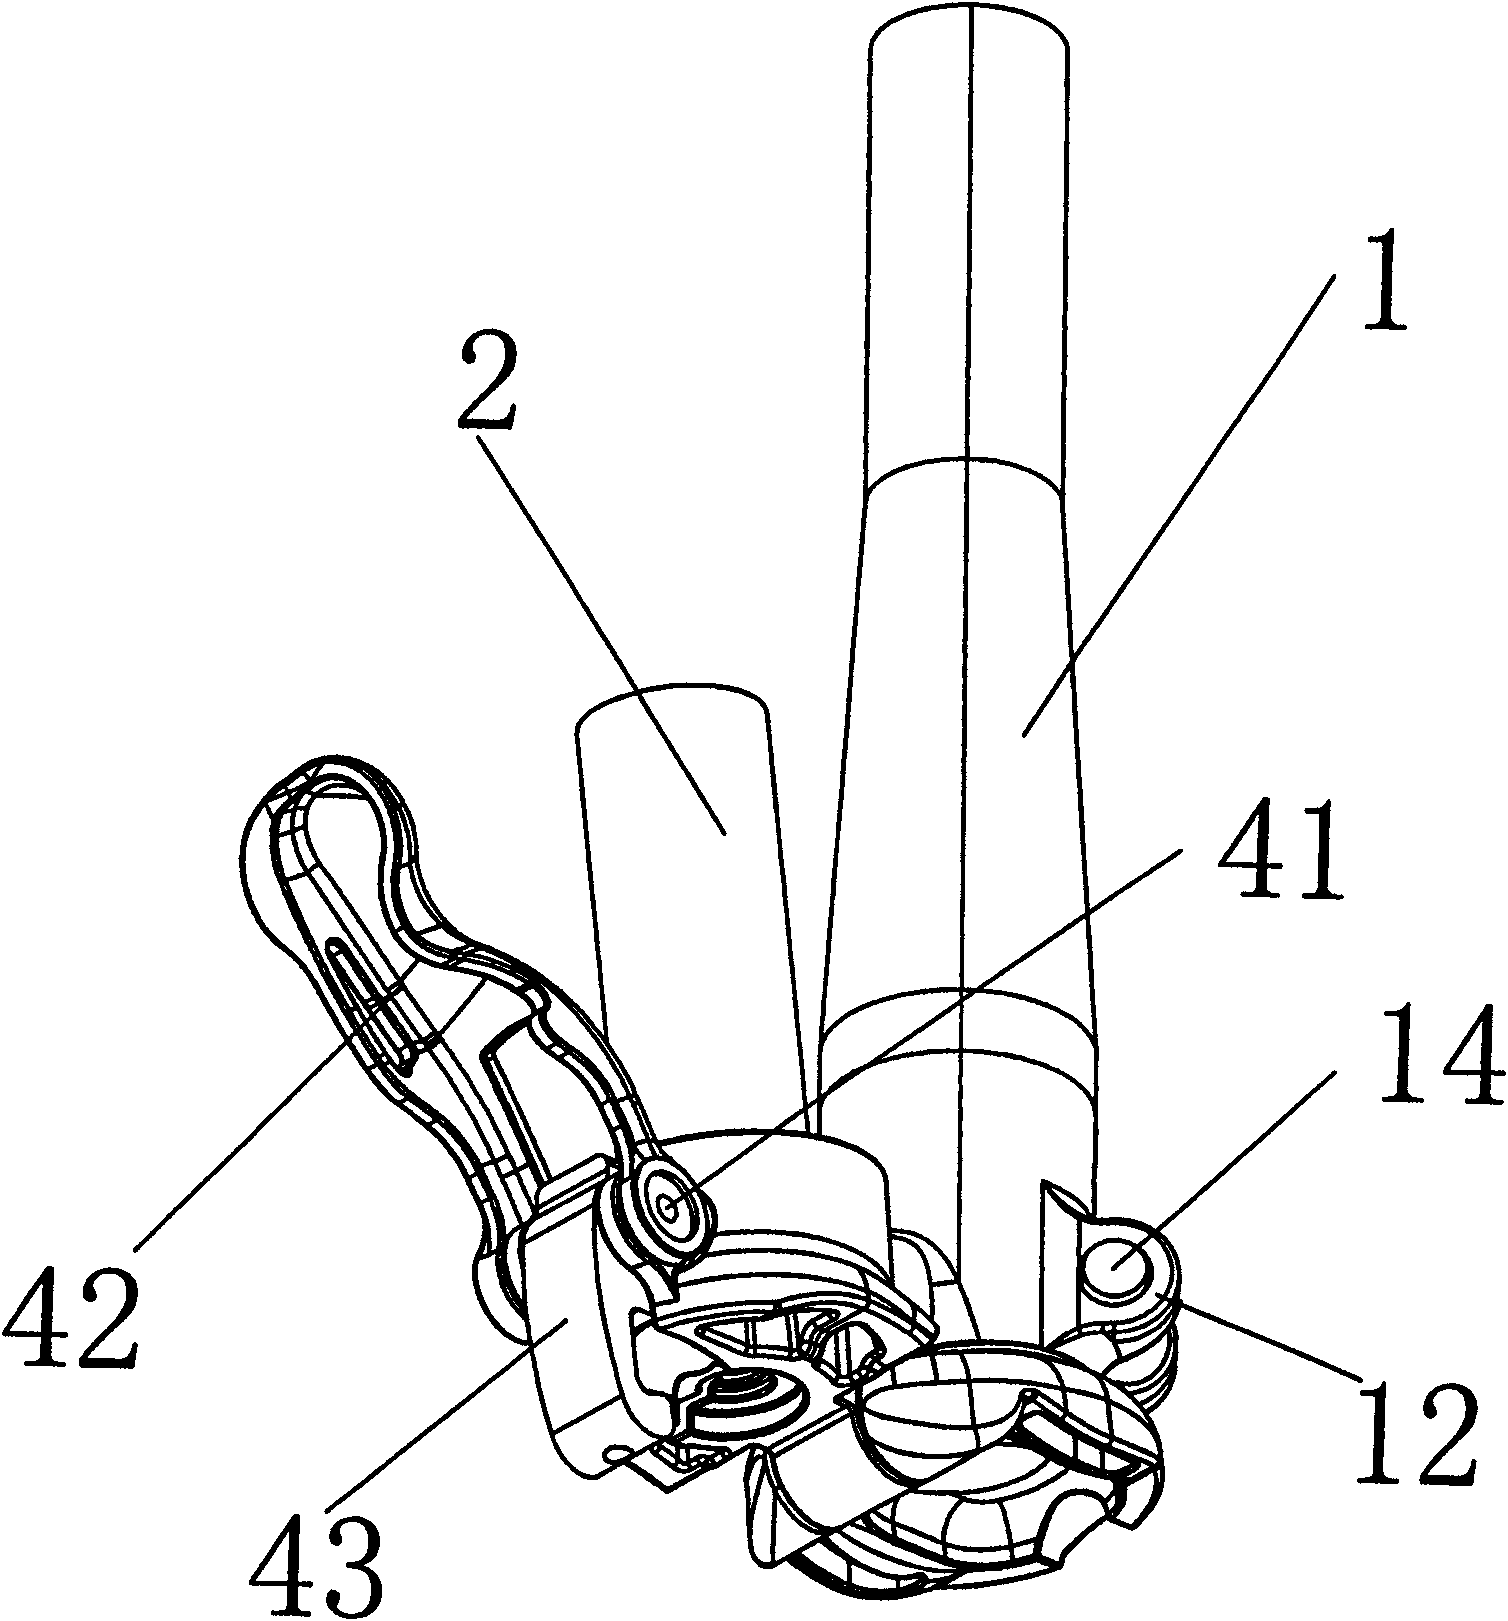 Modified fixing mechanism of riser and front fork vertical bar